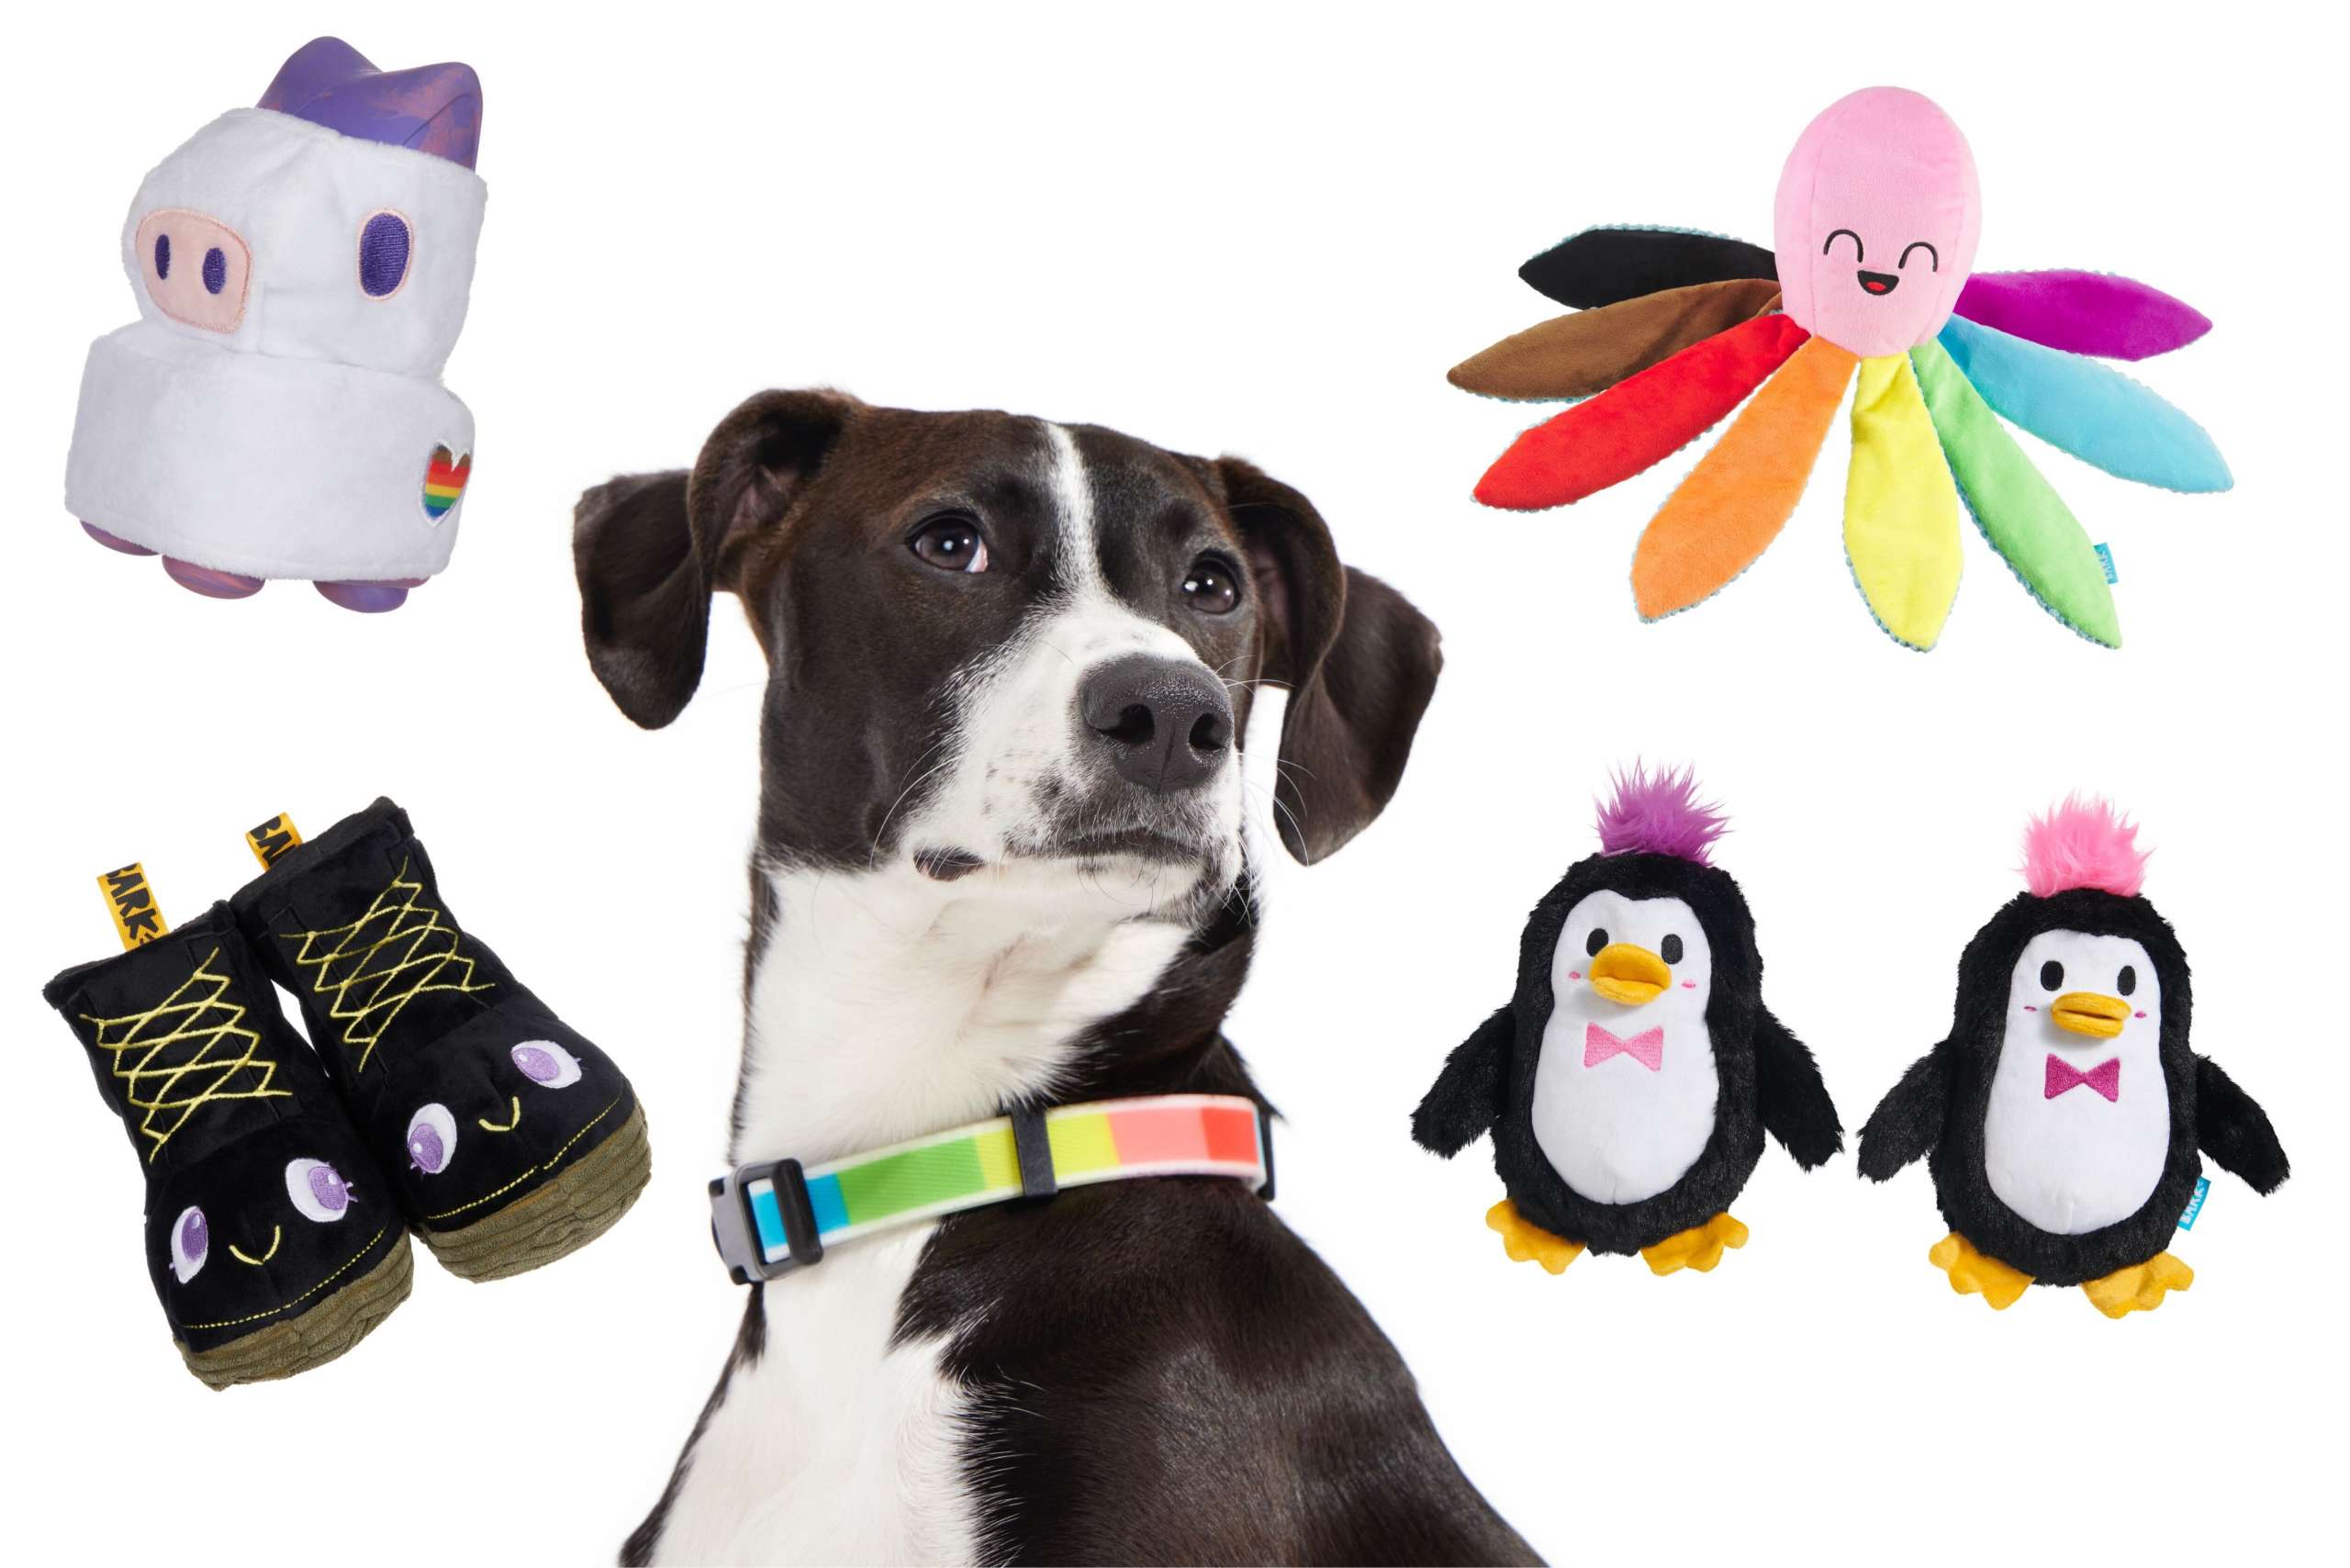 Which Type of "Gay" is Your Dog Based on Their Pride Toy Choice?